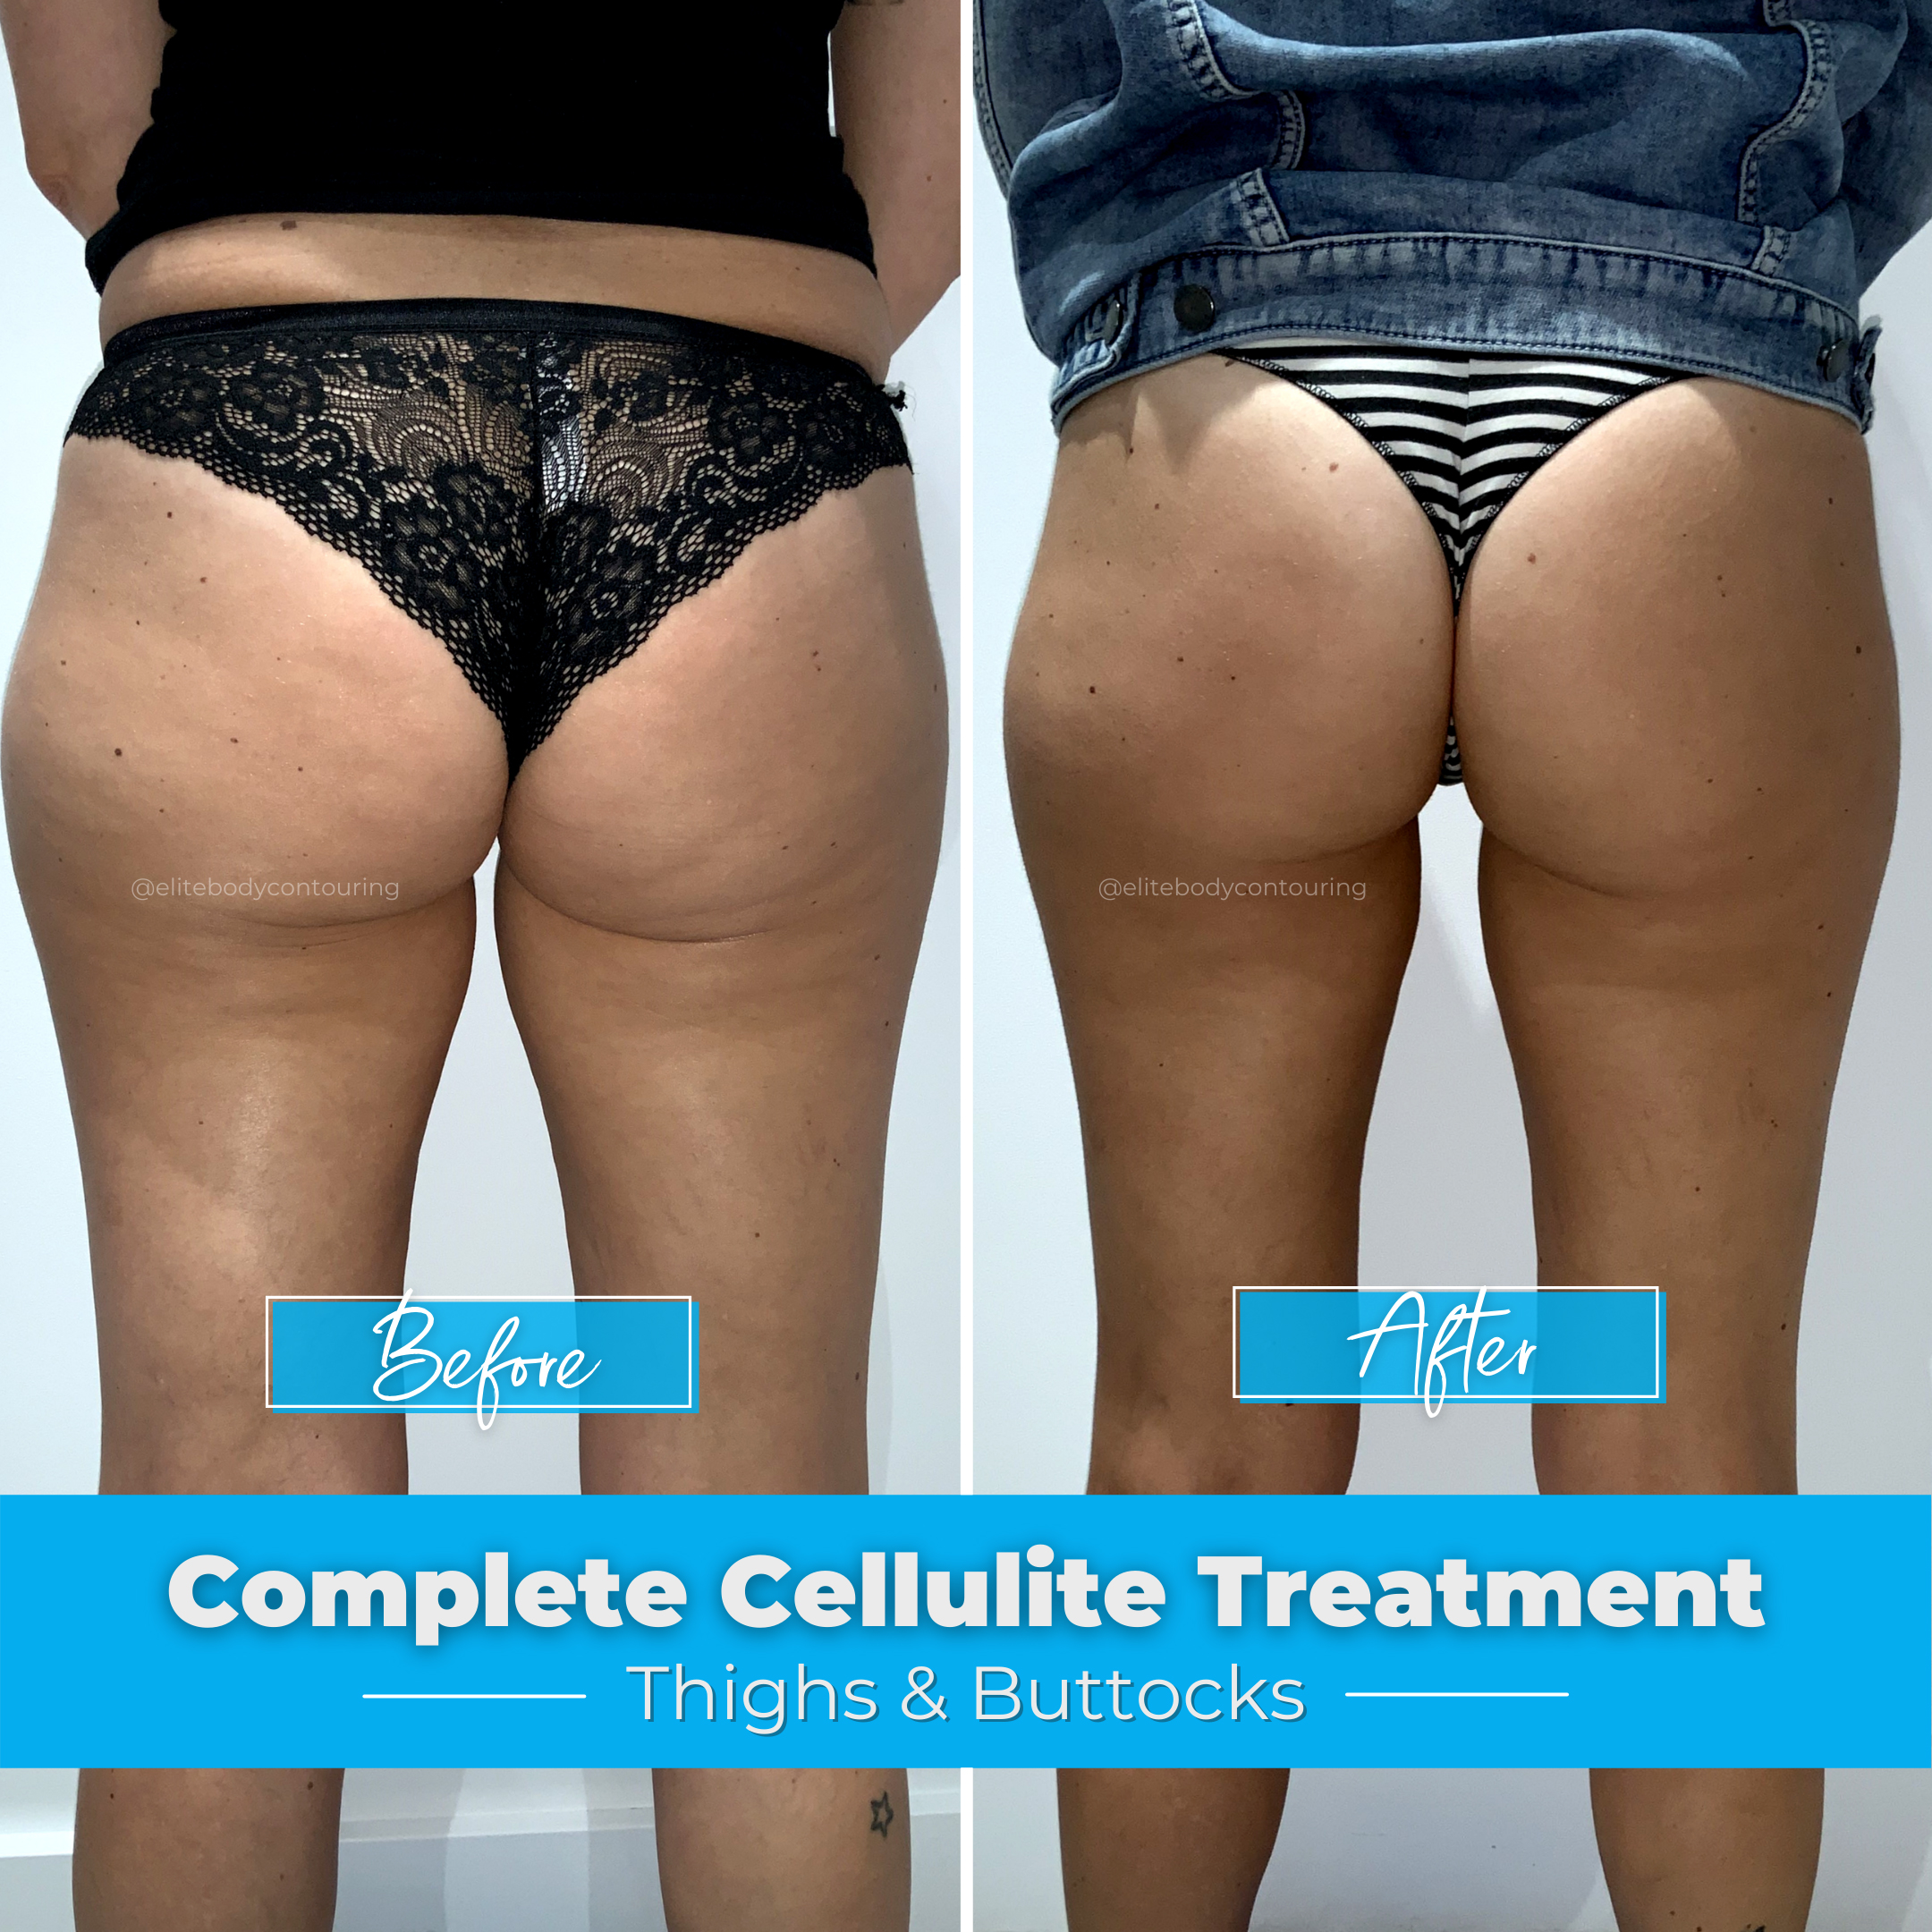 Cellulite Treatment - Thighs & Buttocks